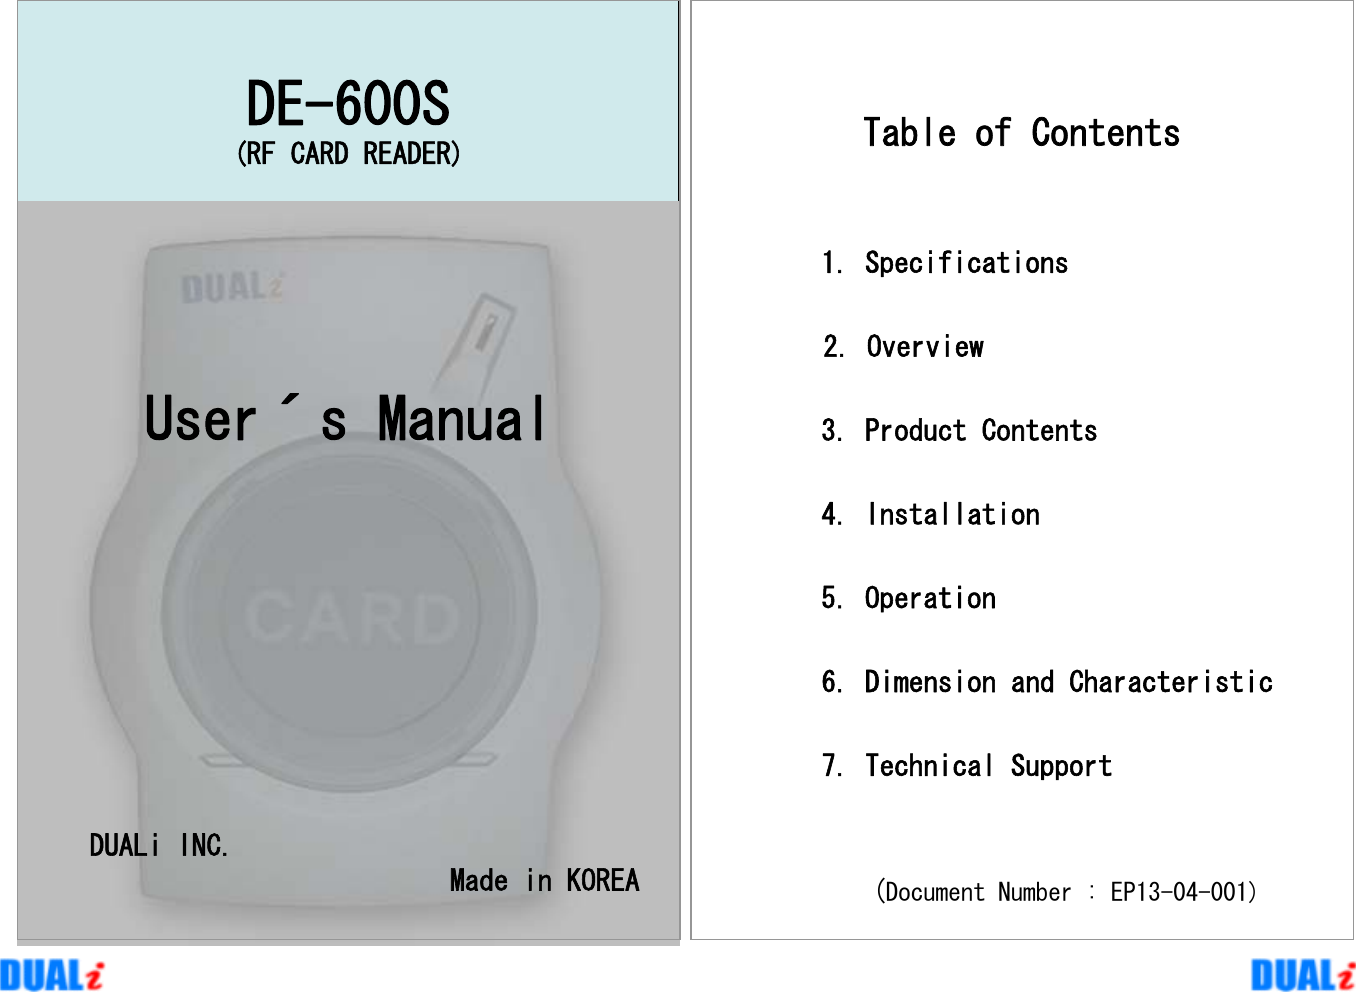 DE-600S(RF CARD READER)User´s ManualDUALi INC.Made in KOREATable of Contents1. Specifications2. Overview3. Product Contents 4. Installation5. Operation 6. Dimension and Characteristic7. Technical Support(Document Number : EP13-04-001)